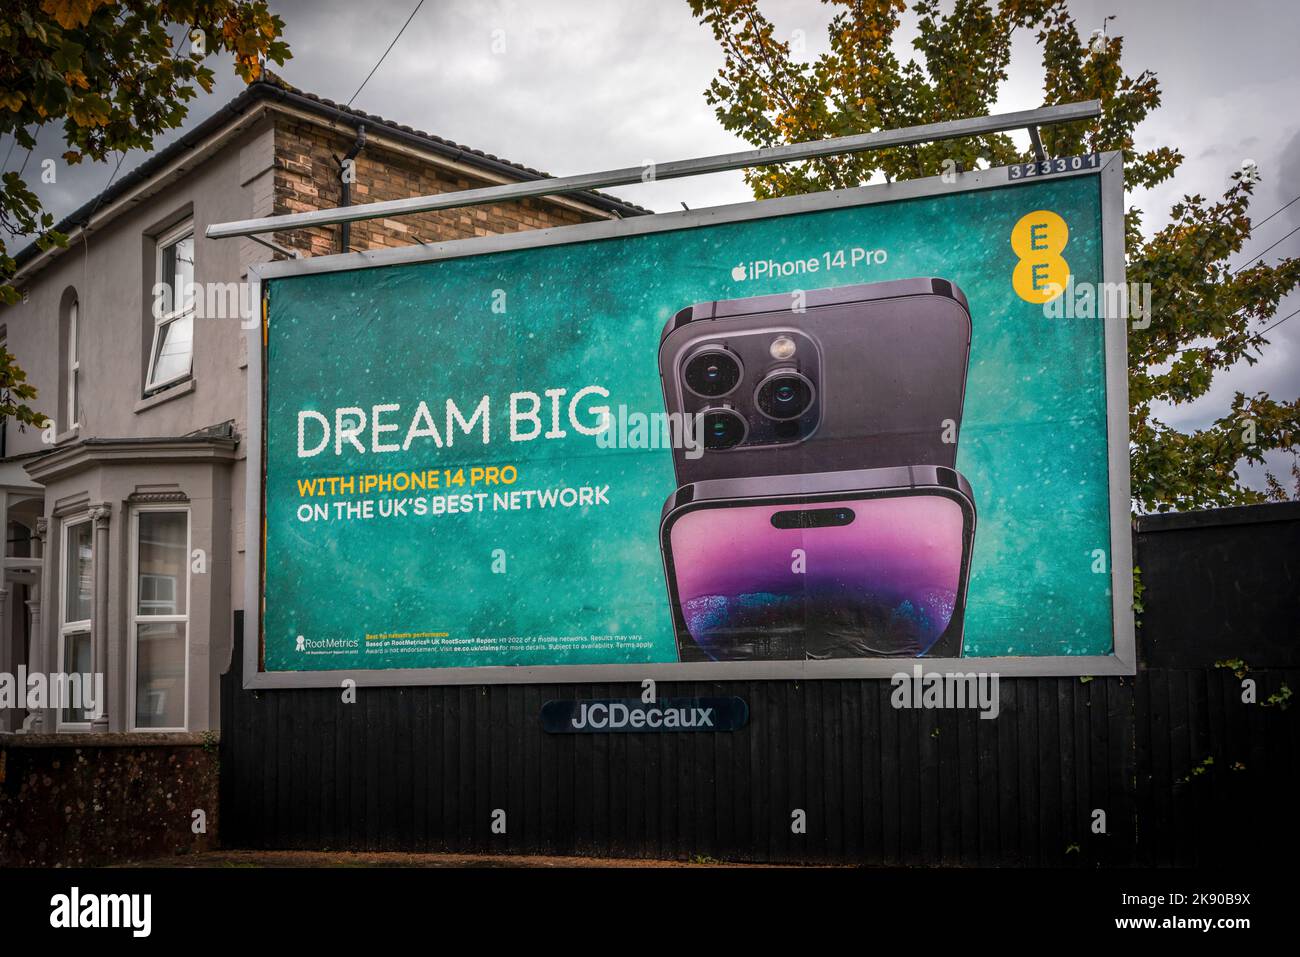 Dream Big new Apple iPhone 14 Pro large advertising billboard for EE mobile network provider during 2022, England, UK Stock Photo